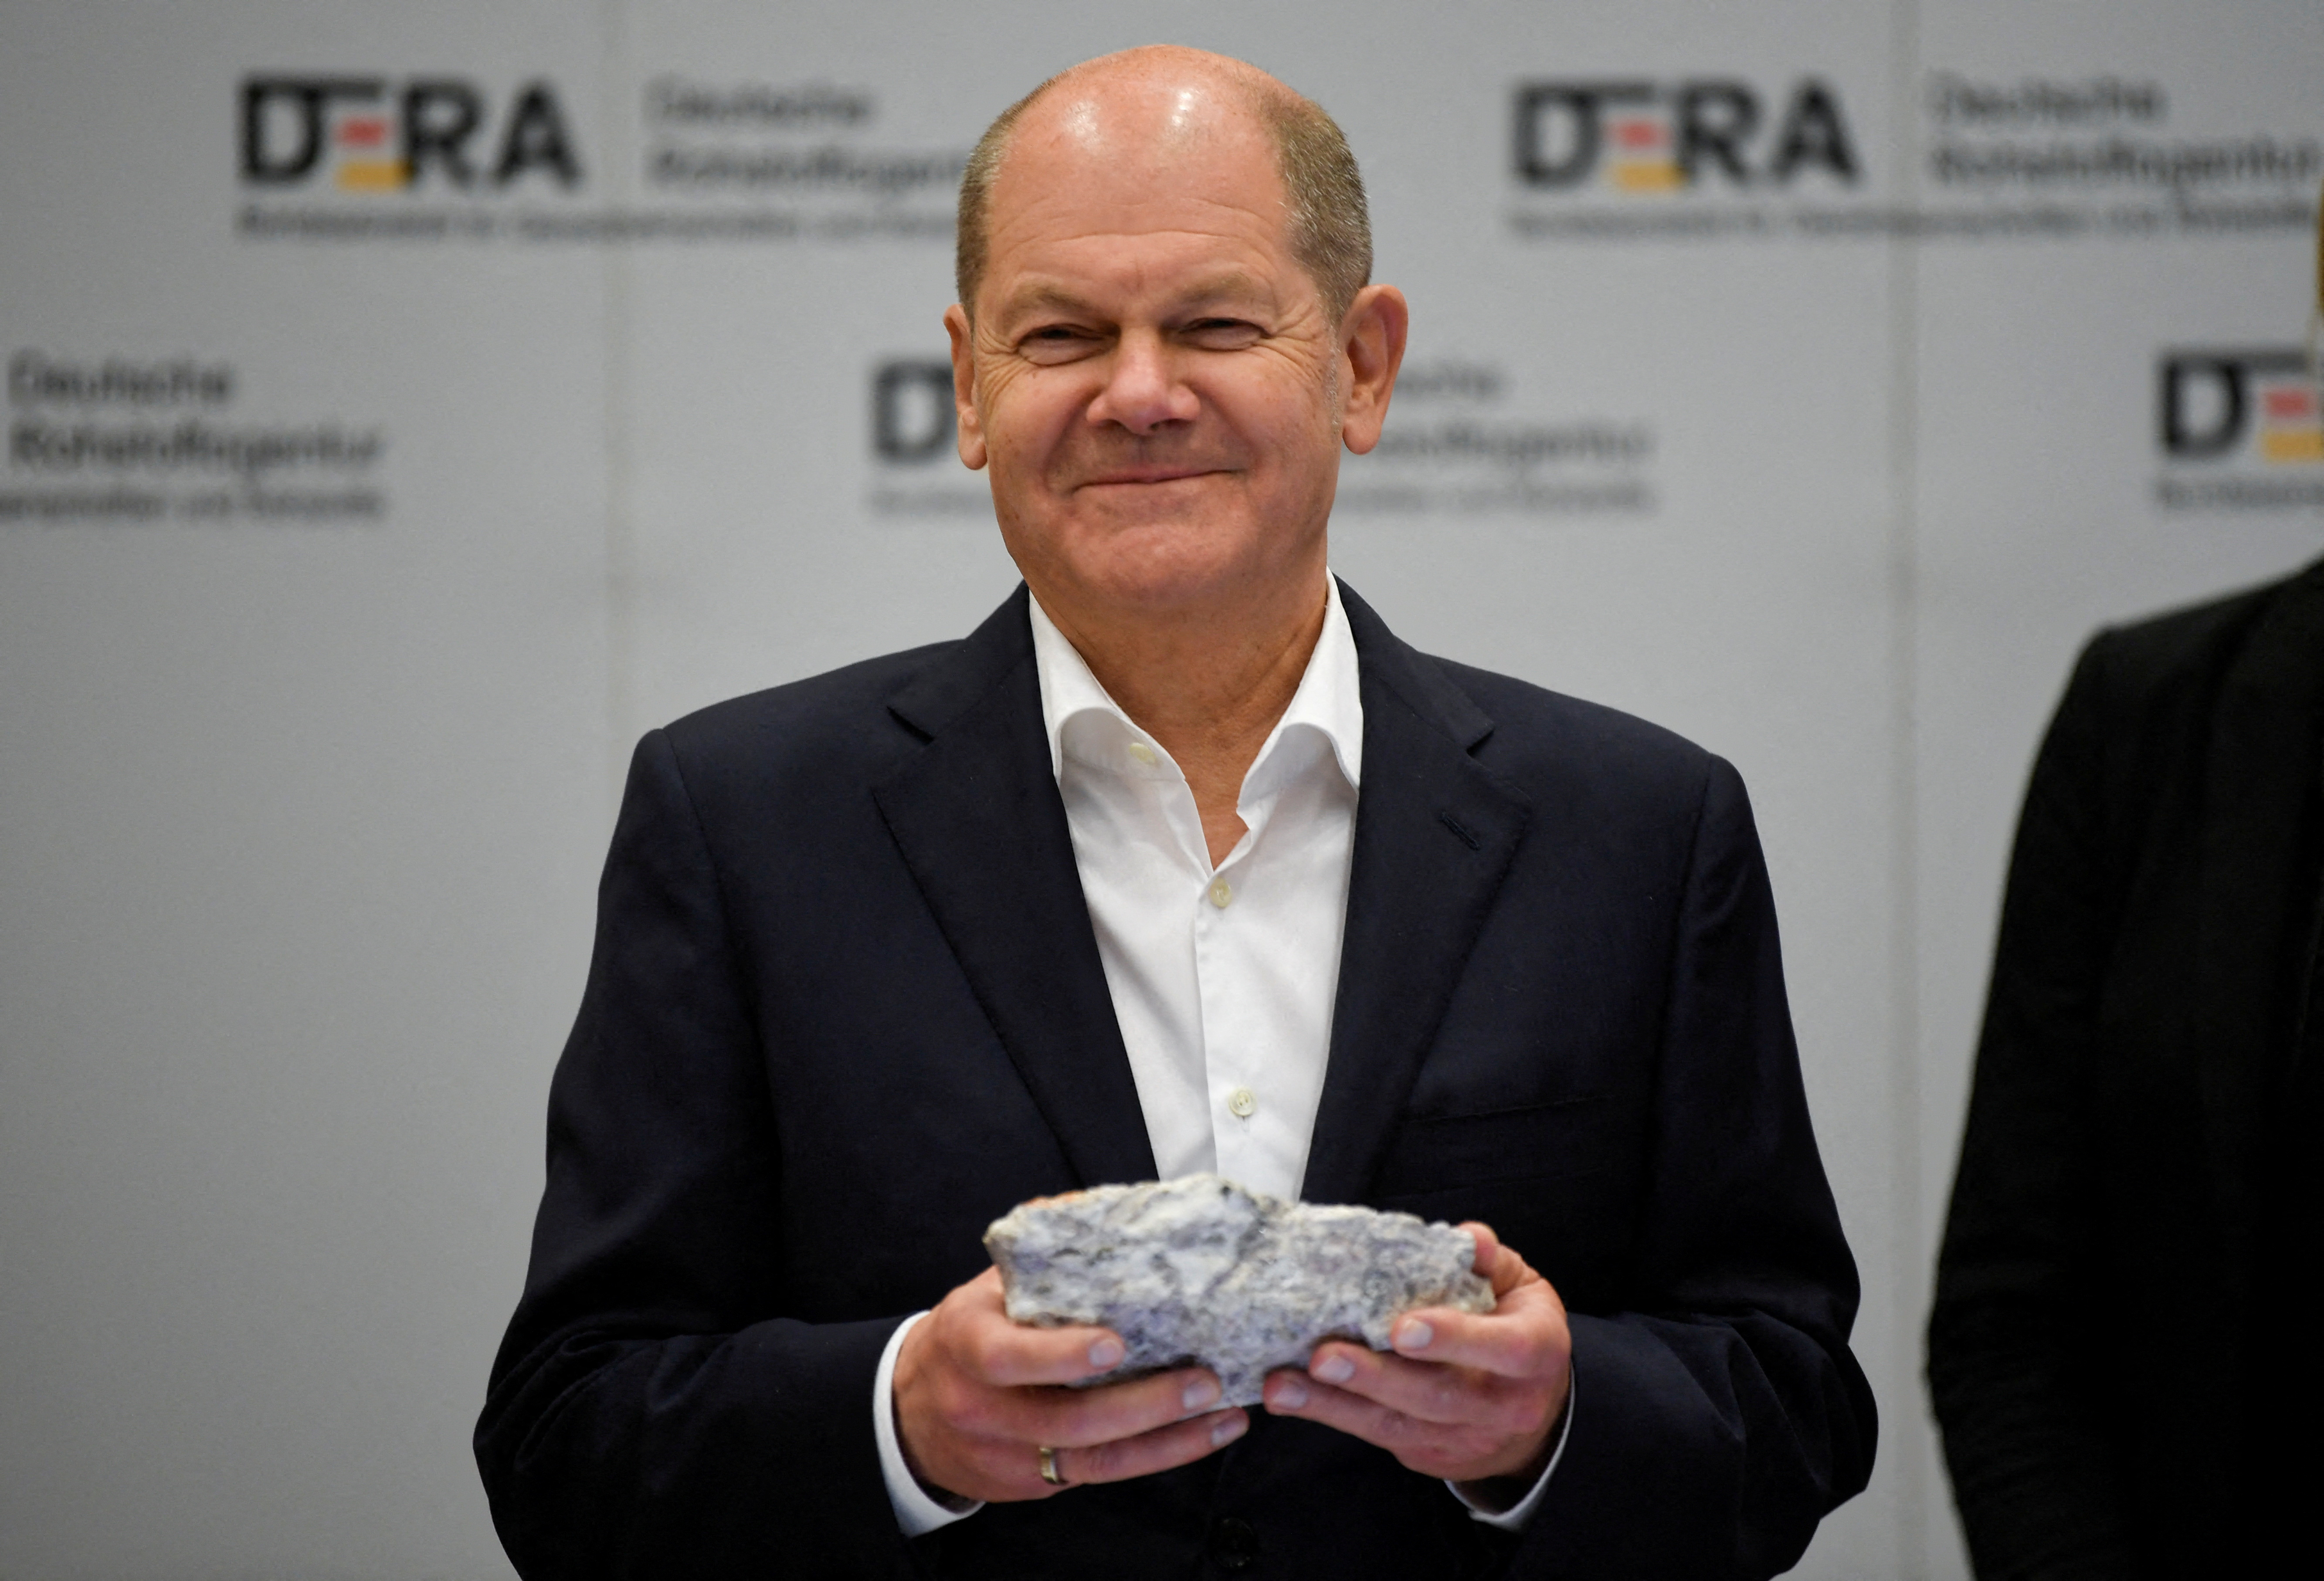 German Chancellor Olaf Scholz visits Federal Institute for Geosciences and Natural Resources in Hanover